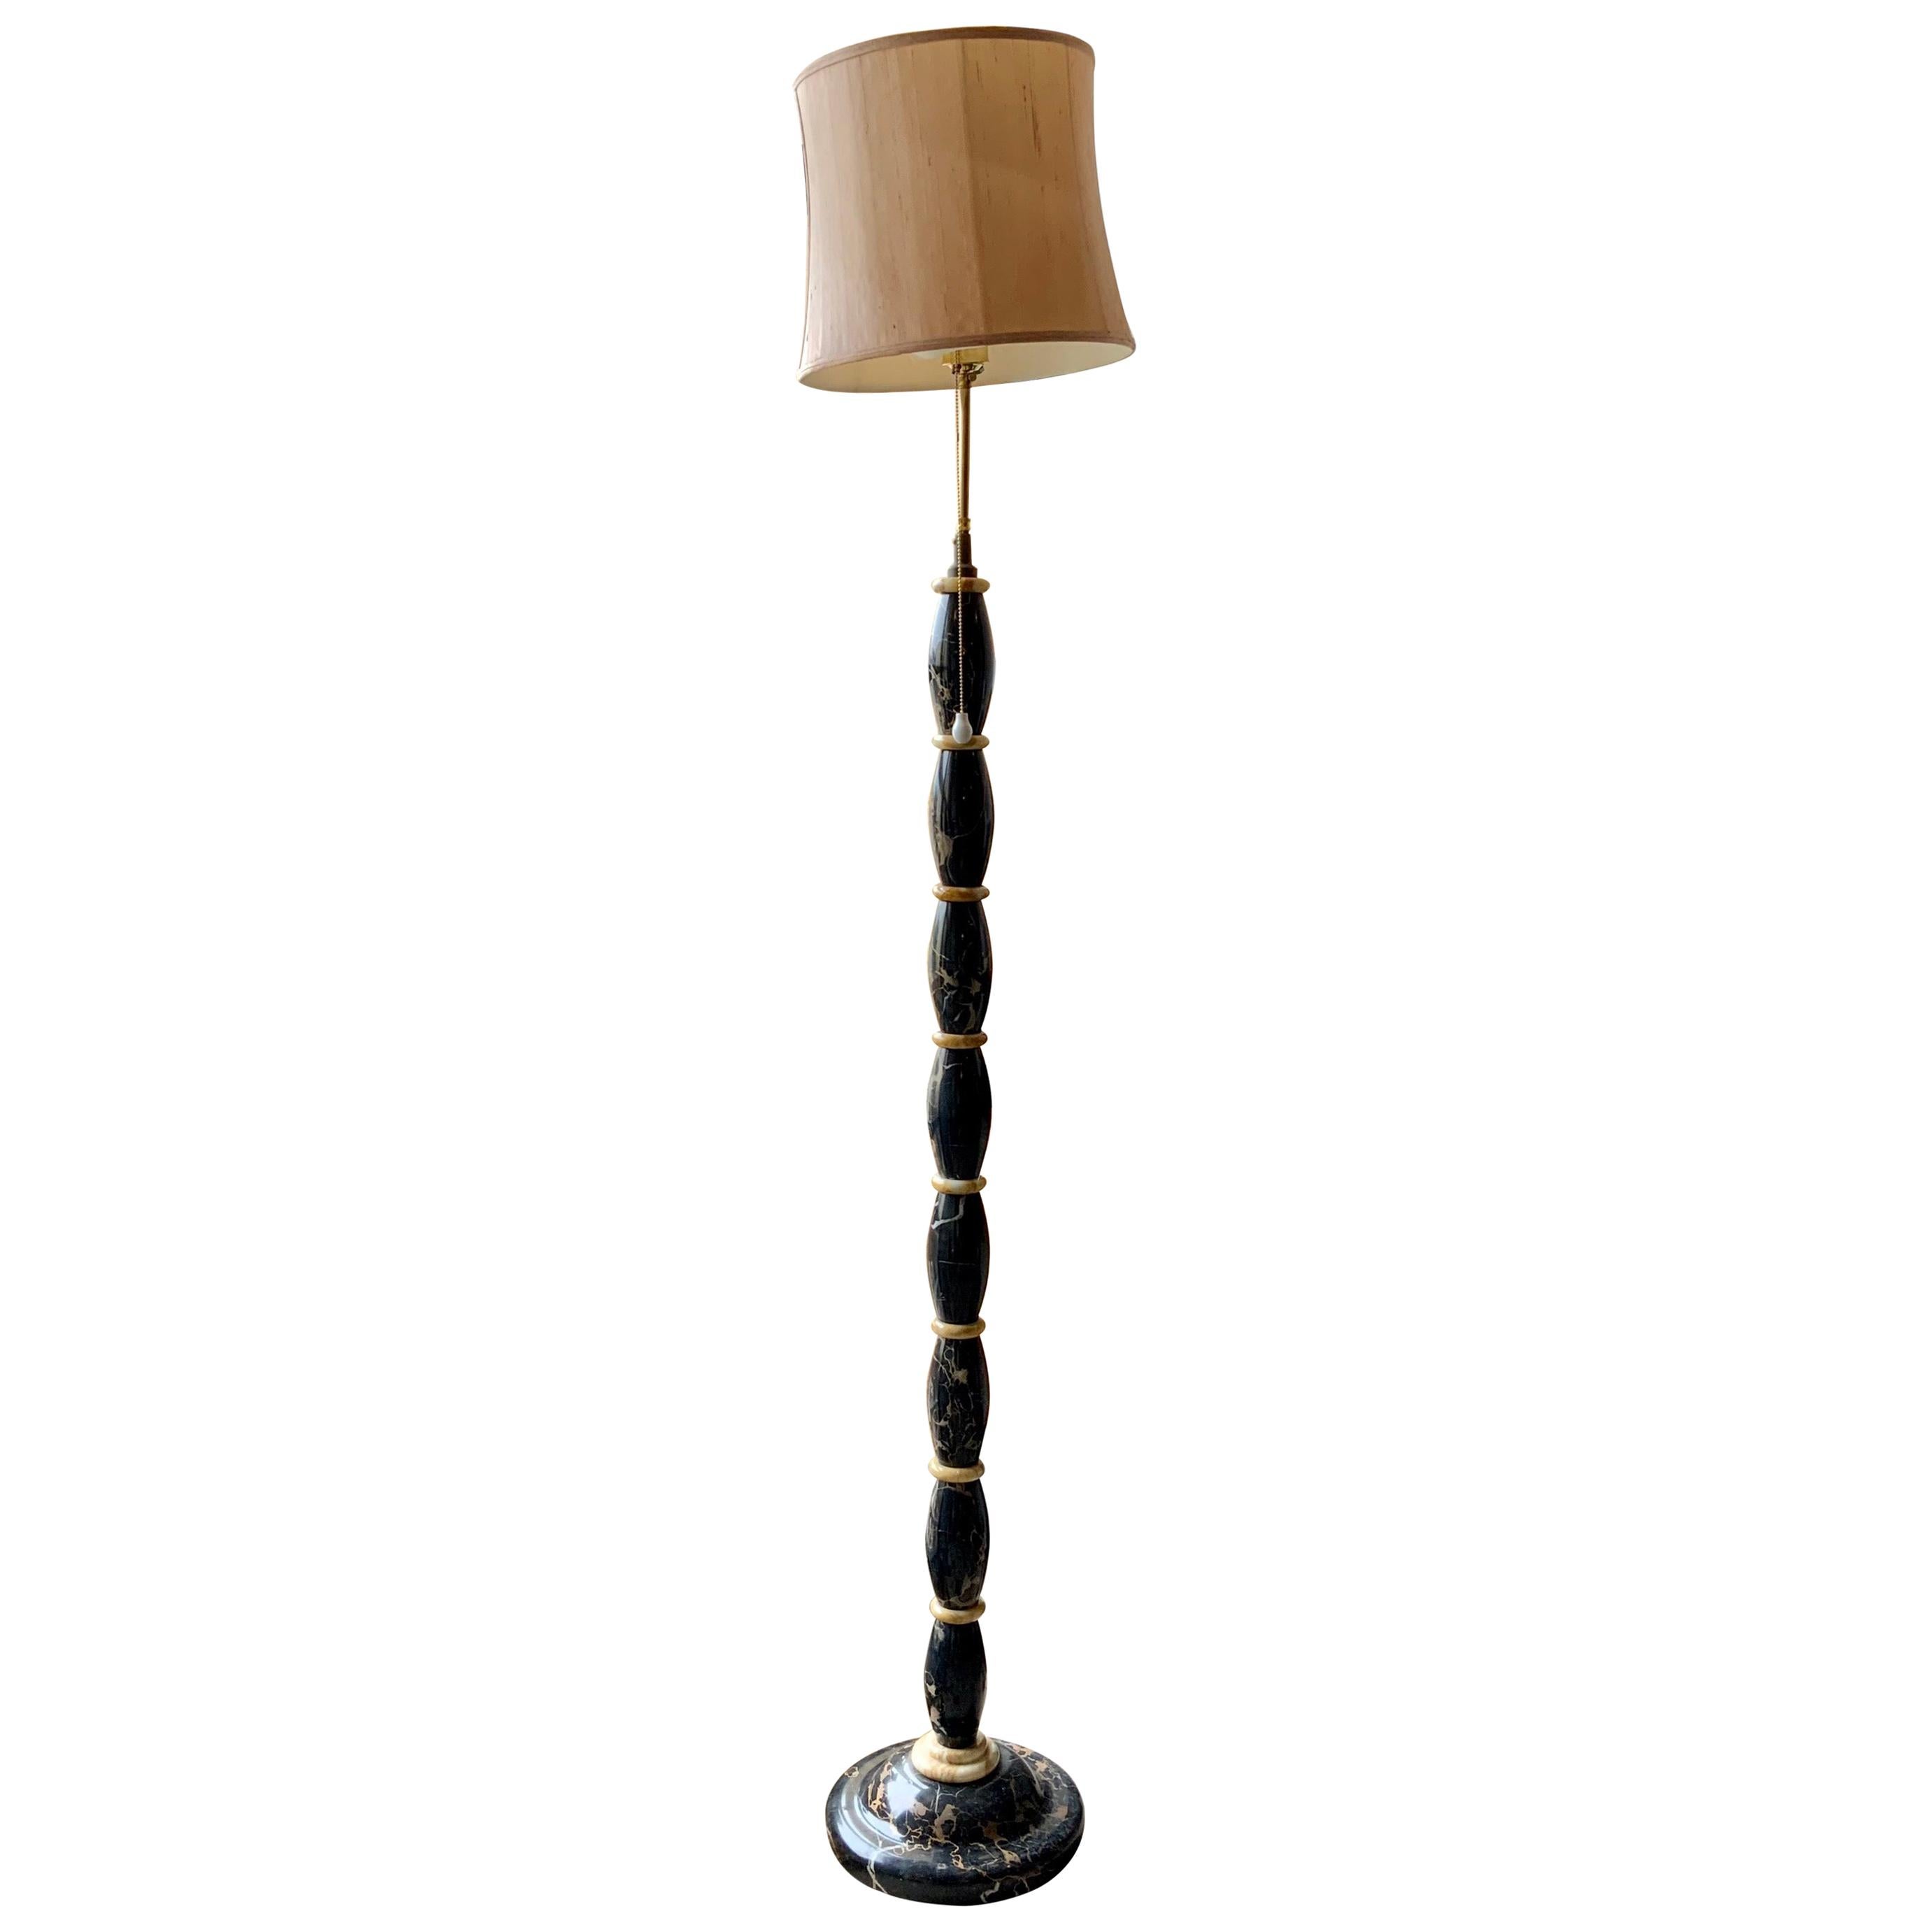 Early 20th Century Marble Lamp from Portugal